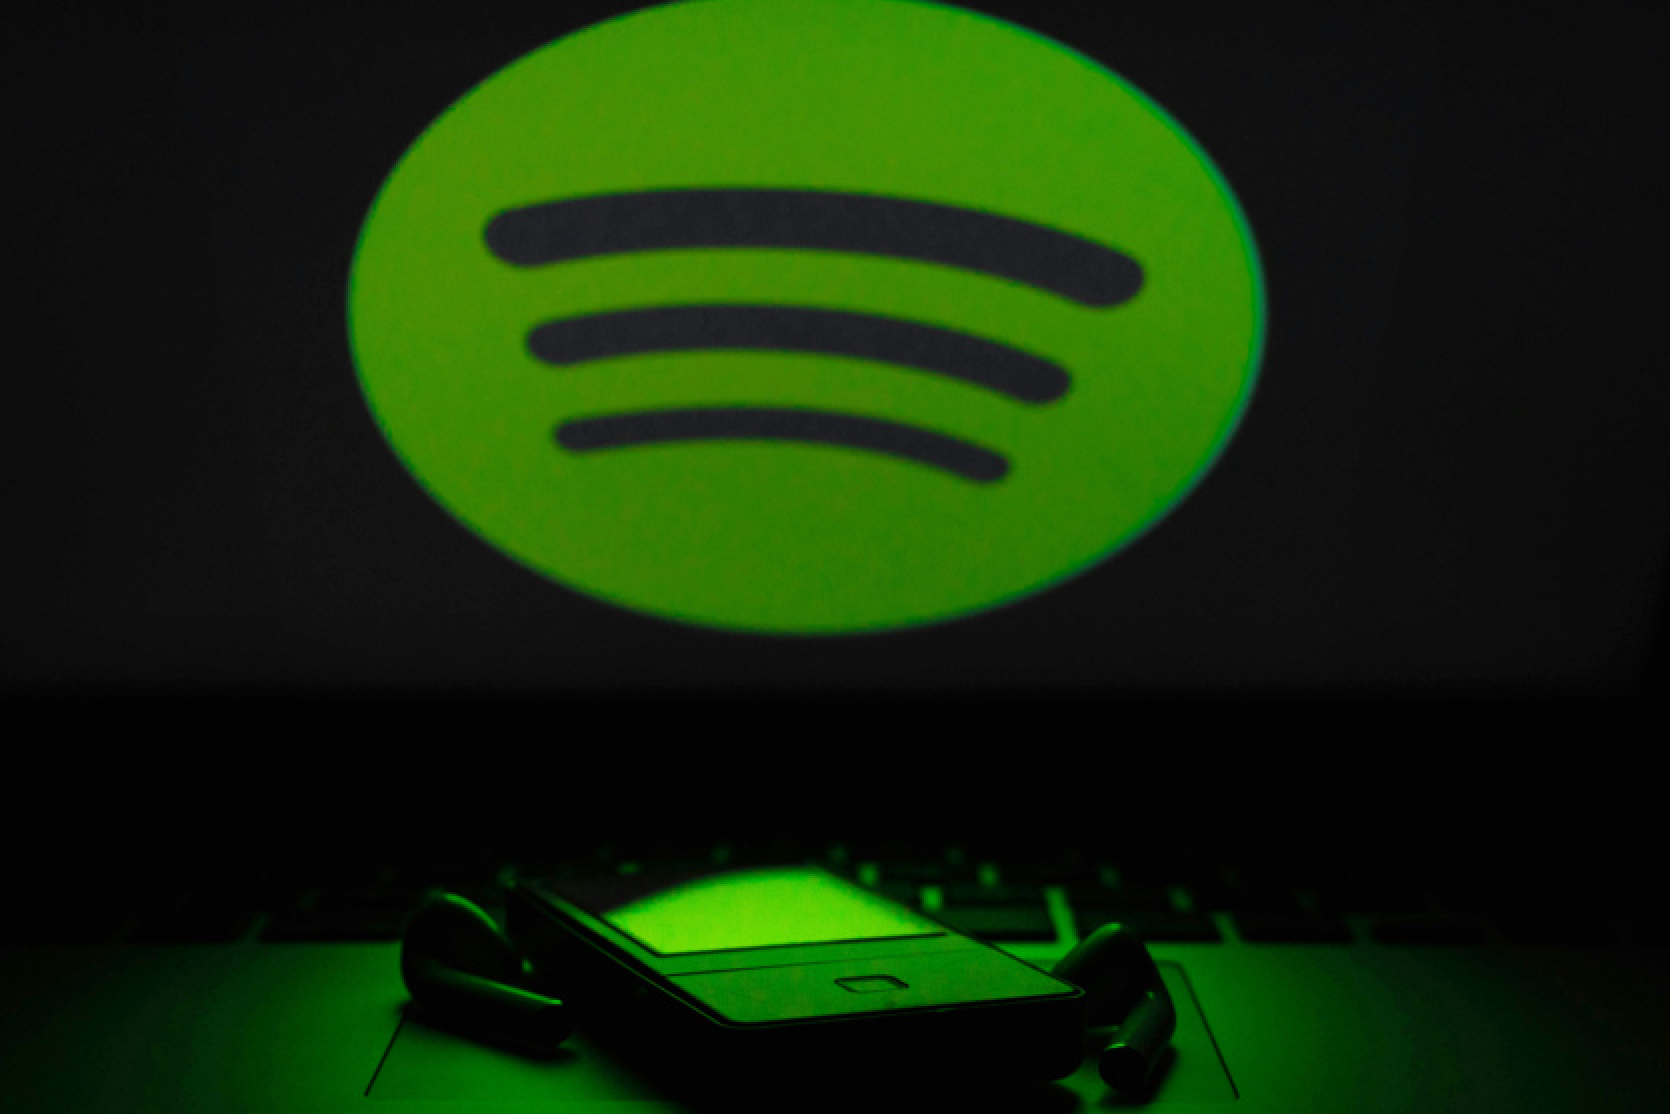 Lossless on Spotify is coming: app code mentions lossless audio in new Music Pro feature